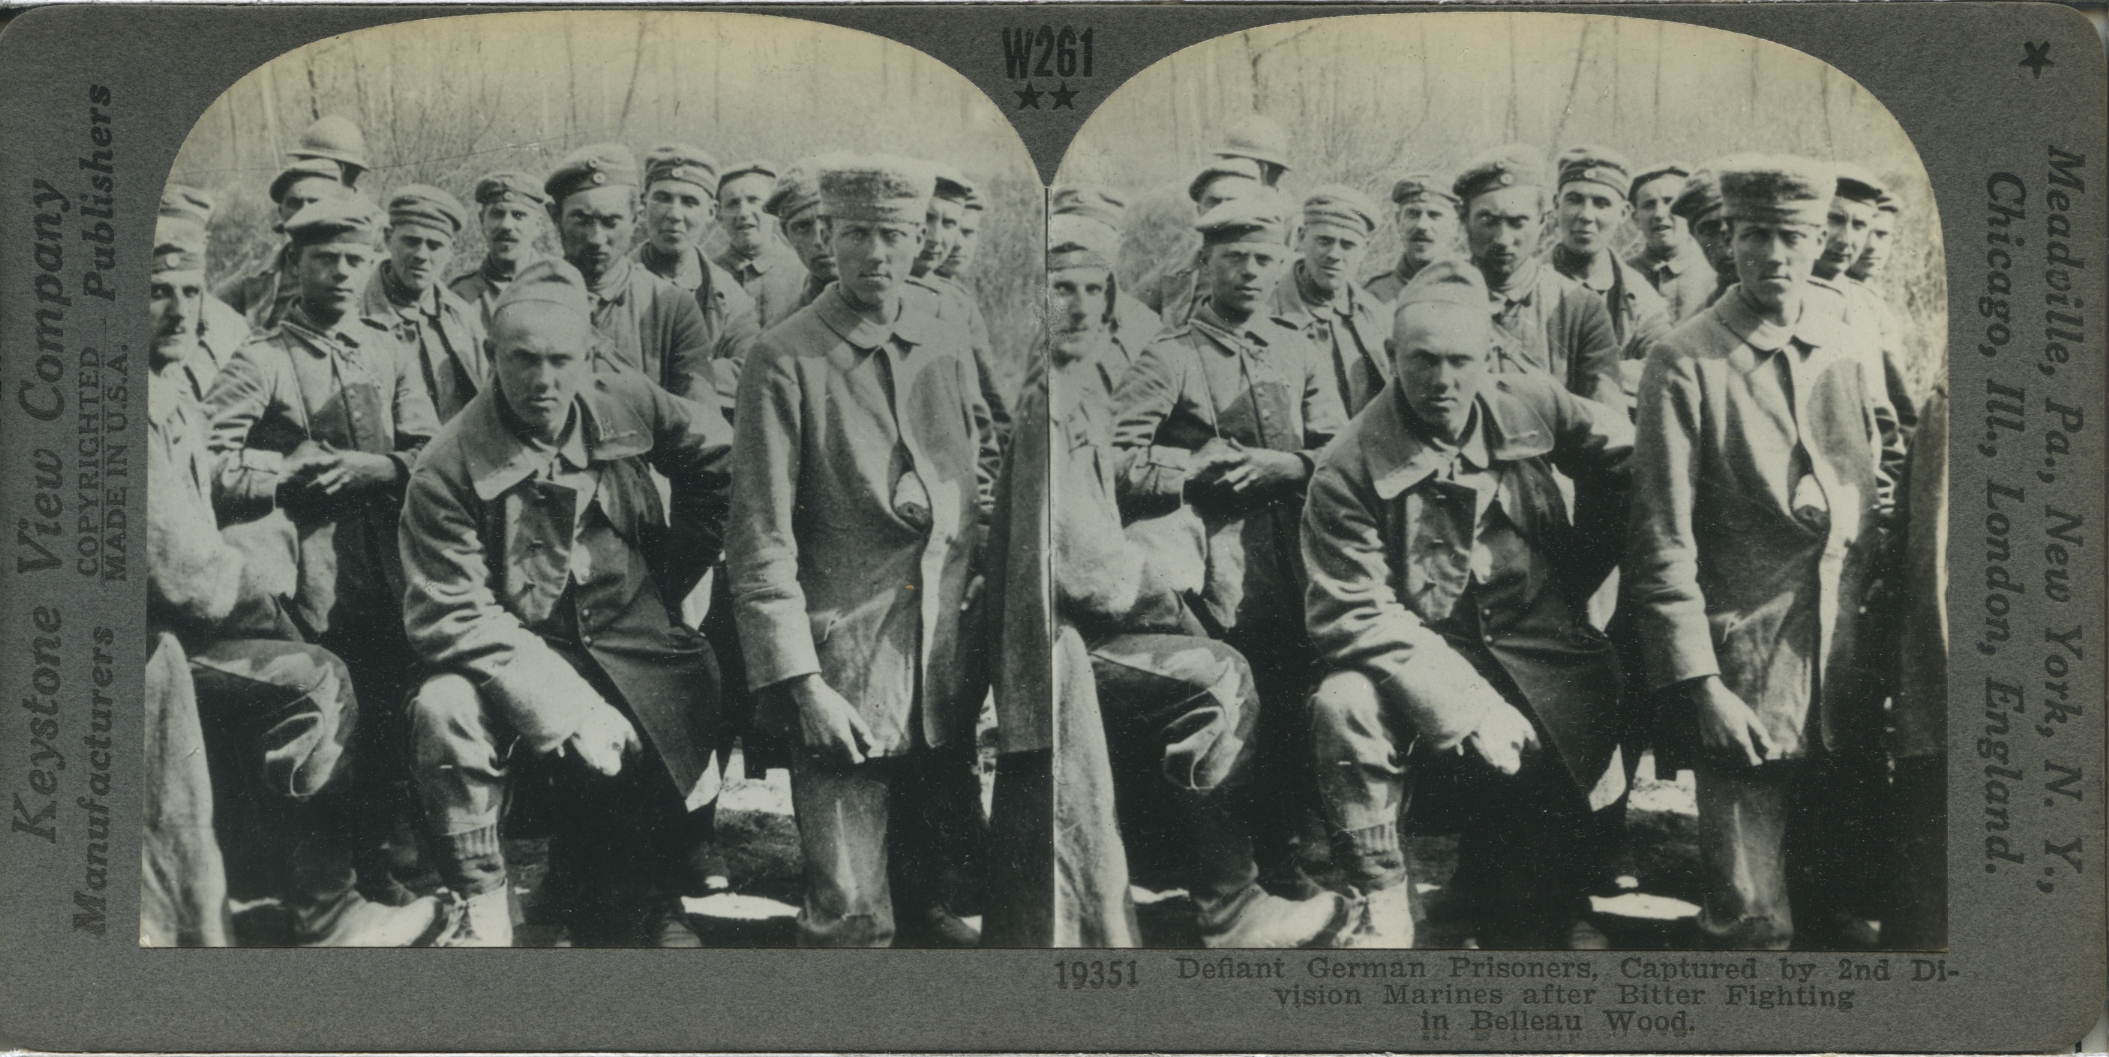 Defiant German prisoners, Captured by 2nd Division Marines after Bitter Fighting in Belleau Wood